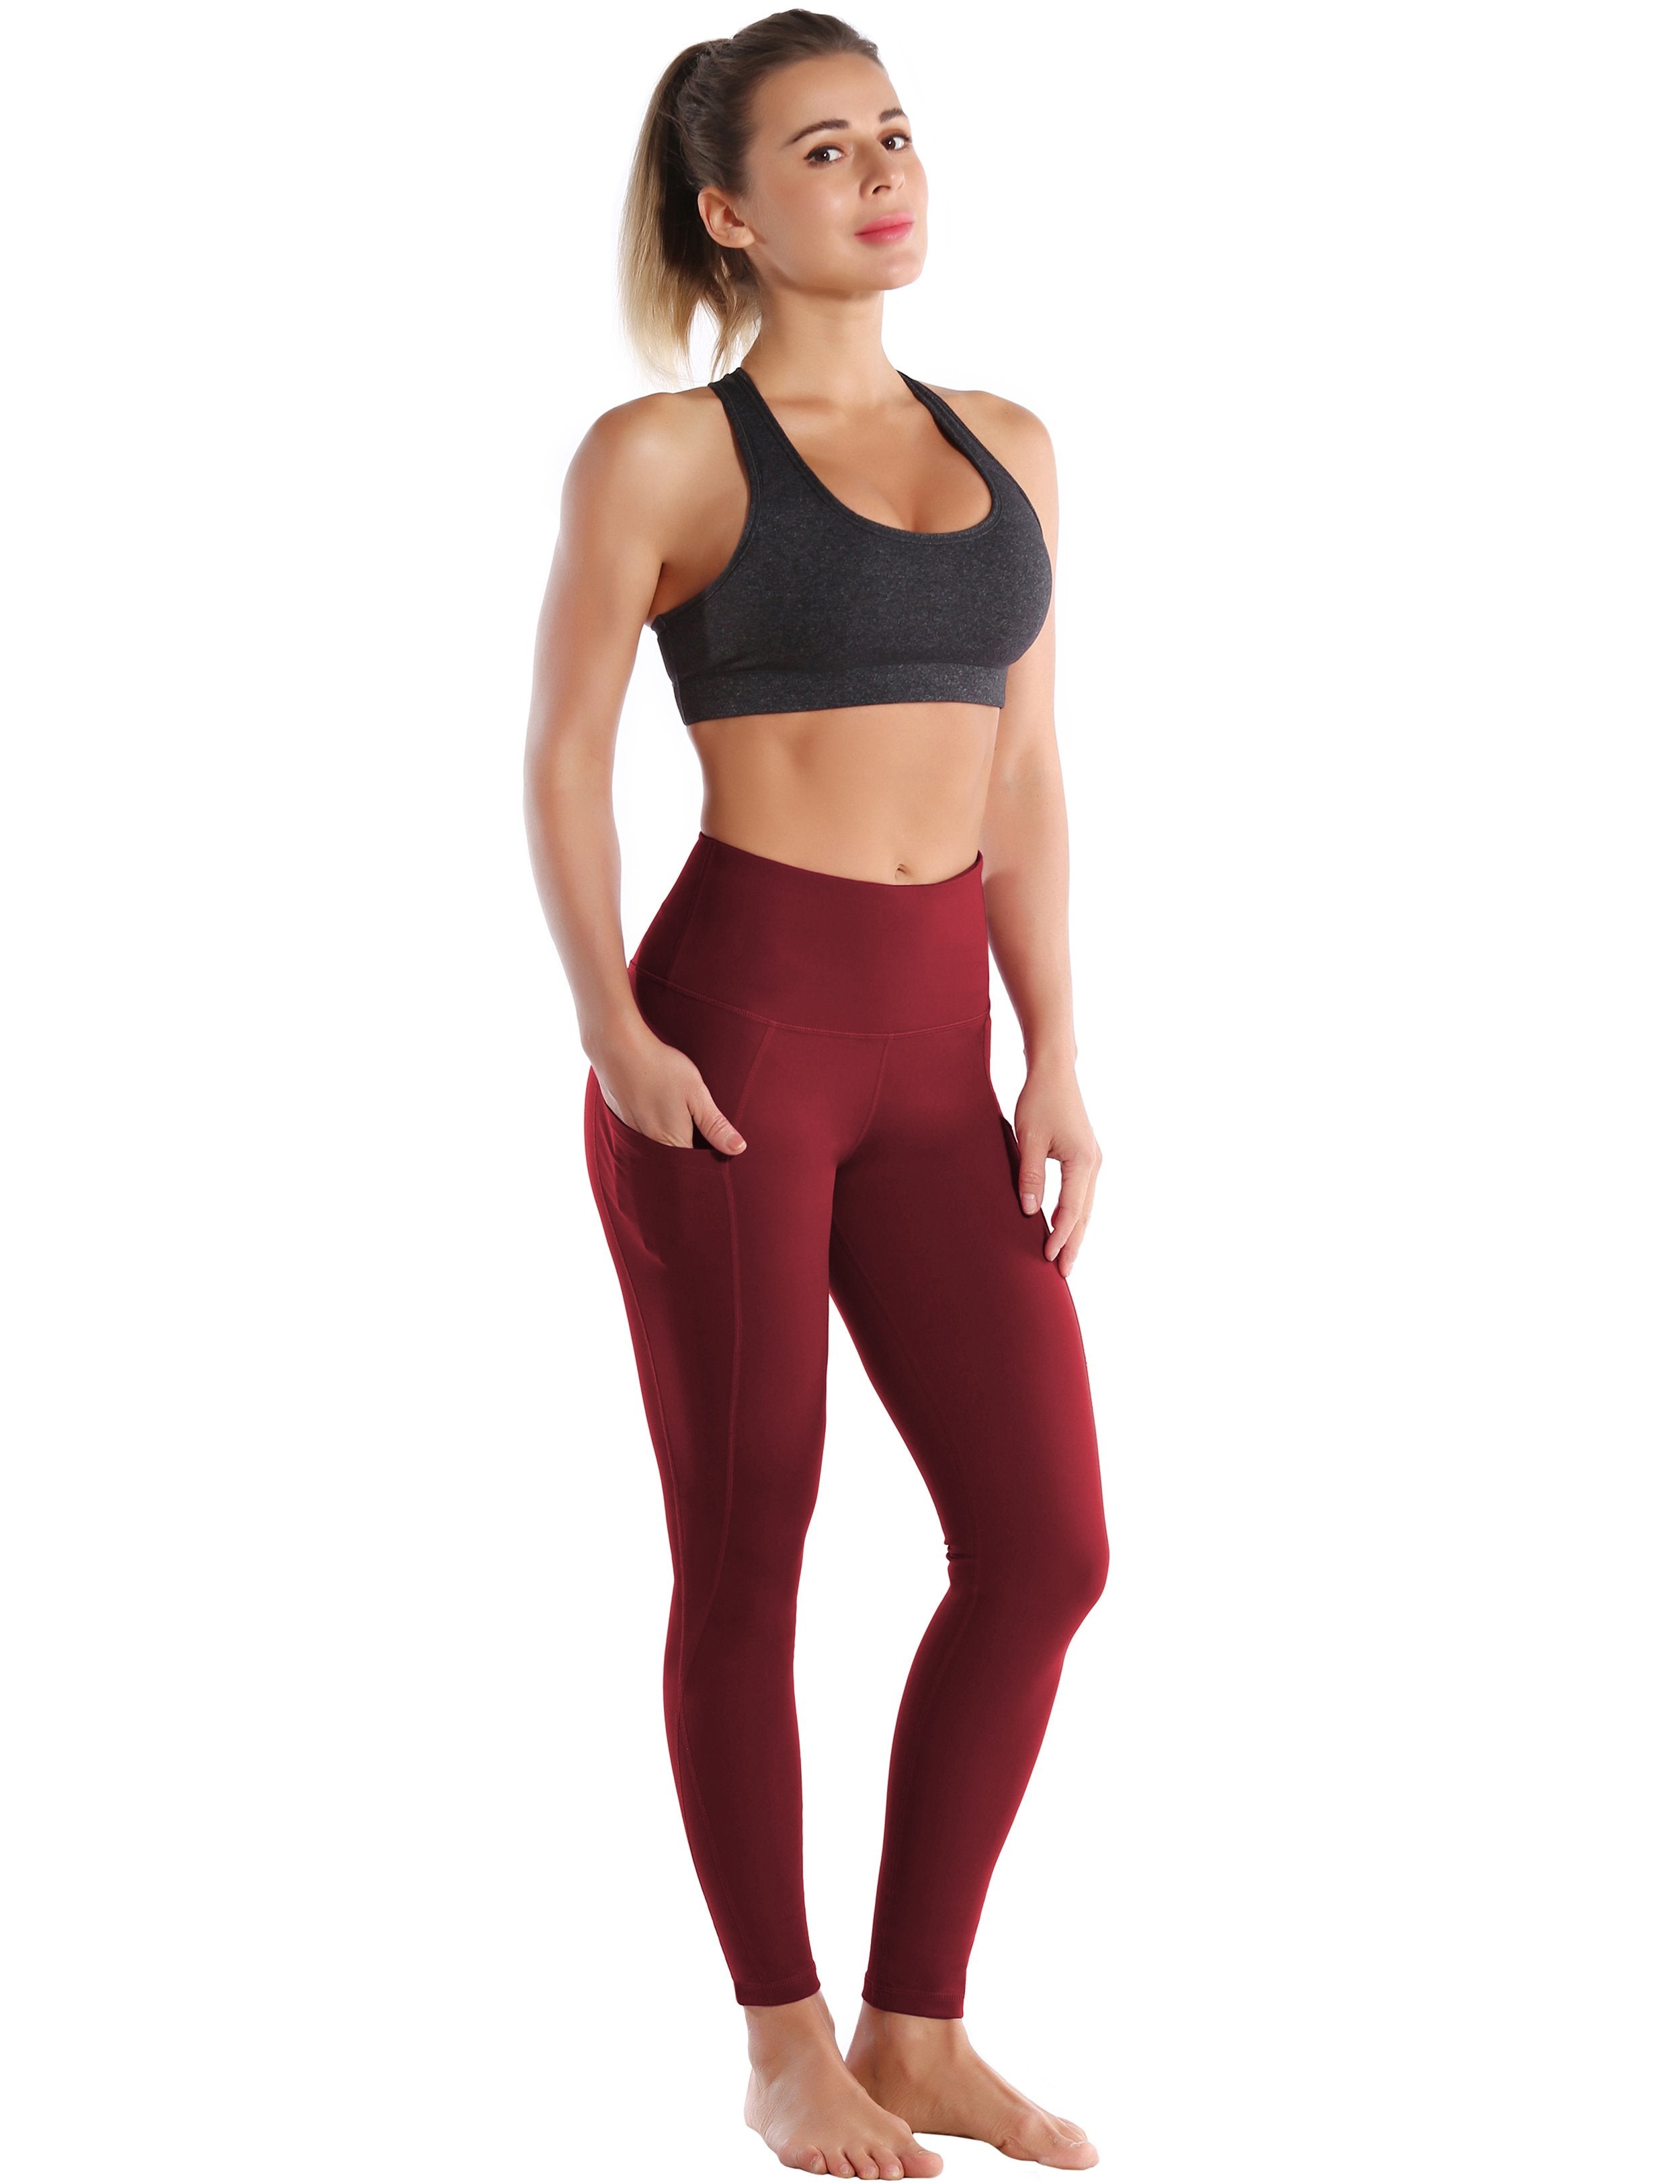 High Waist Side Pockets Golf Pants cherryred 75% Nylon, 25% Spandex Fabric doesn't attract lint easily 4-way stretch No see-through Moisture-wicking Tummy control Inner pocket